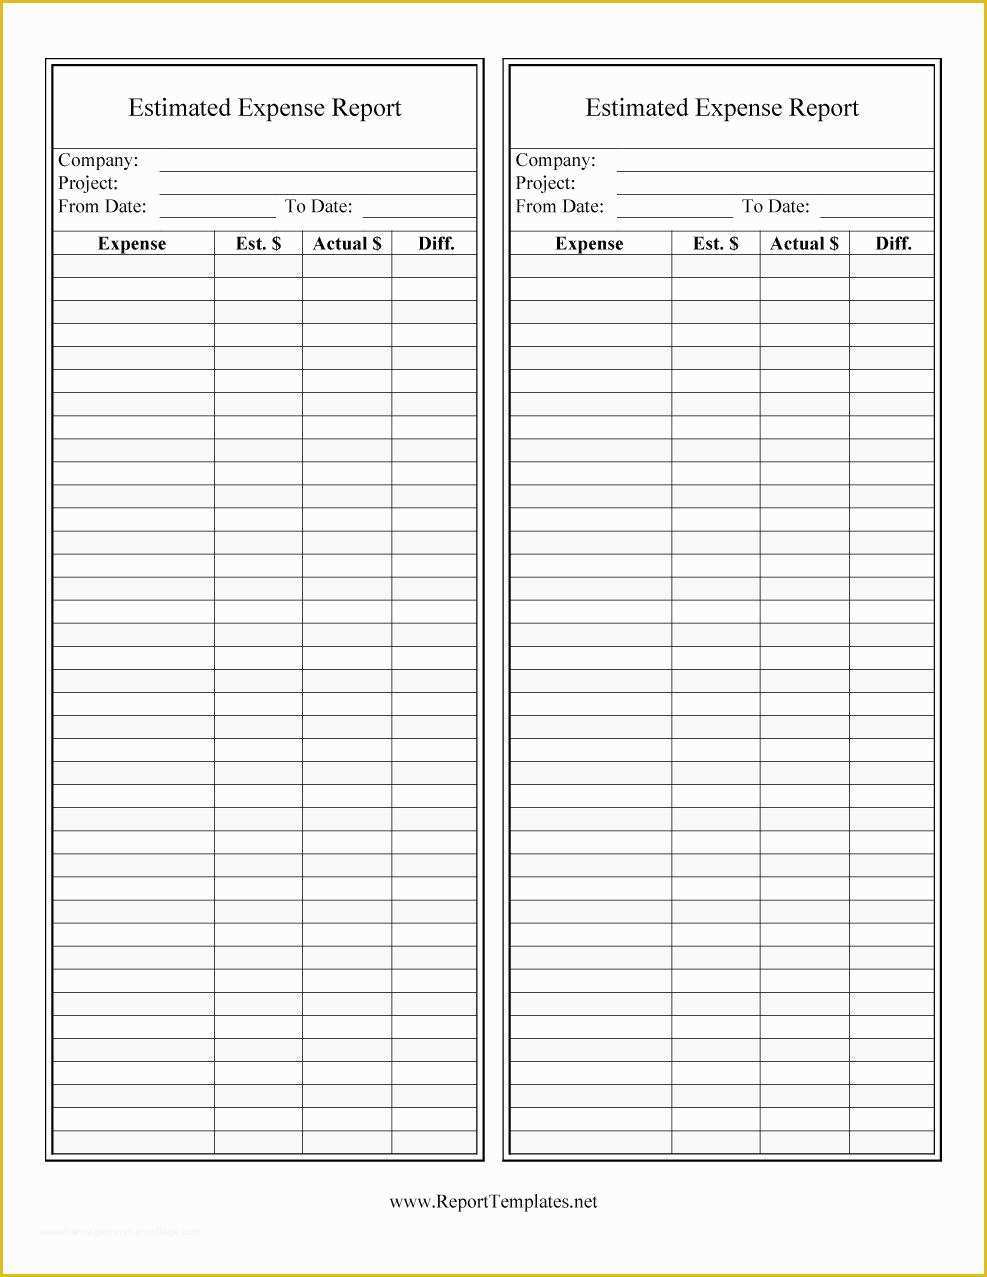 Free Expense Report Template Of 40 Expense Report Templates to Help You Save Money